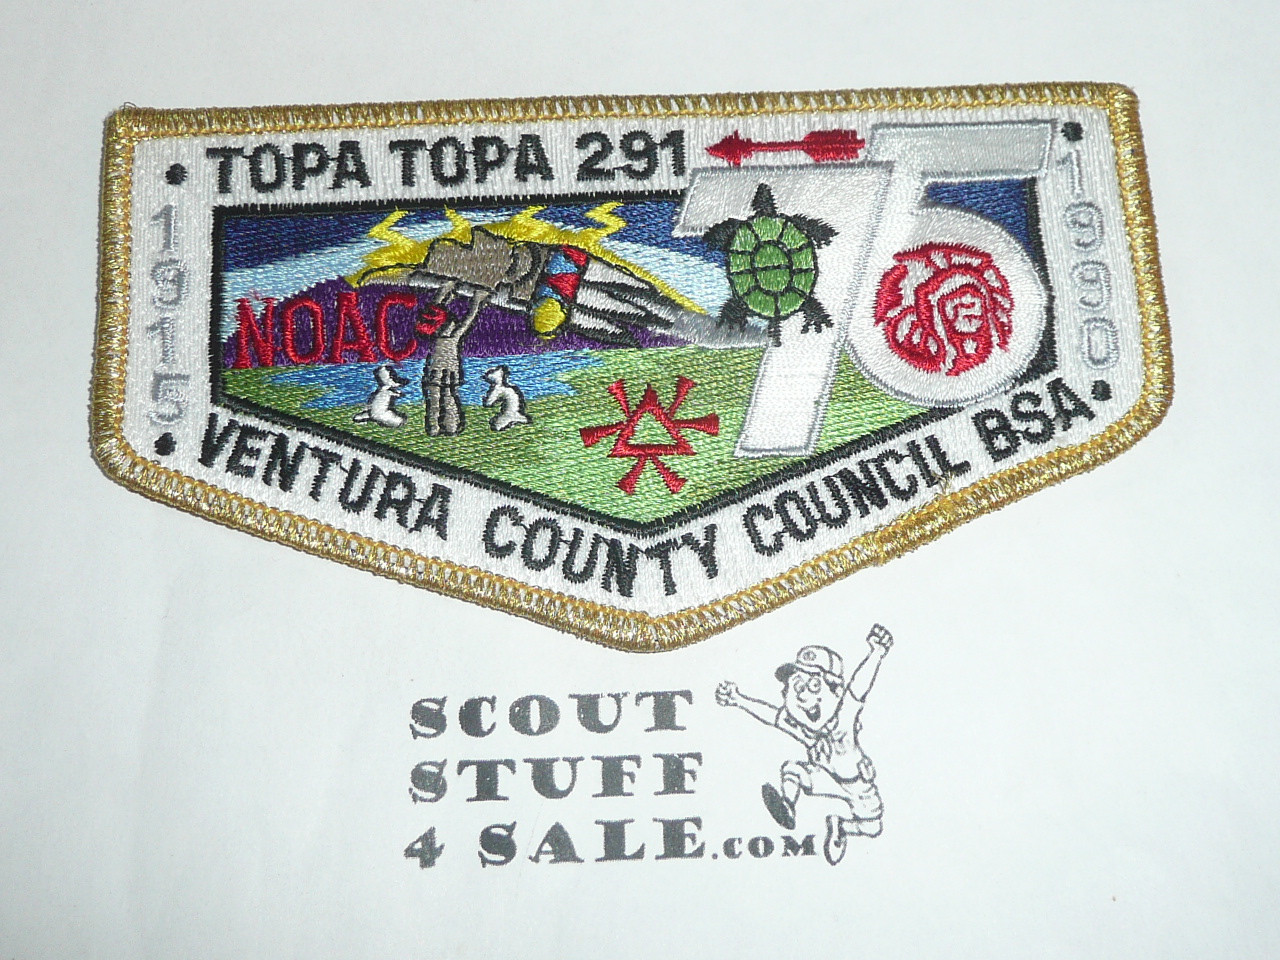 Order of the Arrow Lodge #291 Topa Topa s38 OA 75th Anniversary and NOAC Flap Patch